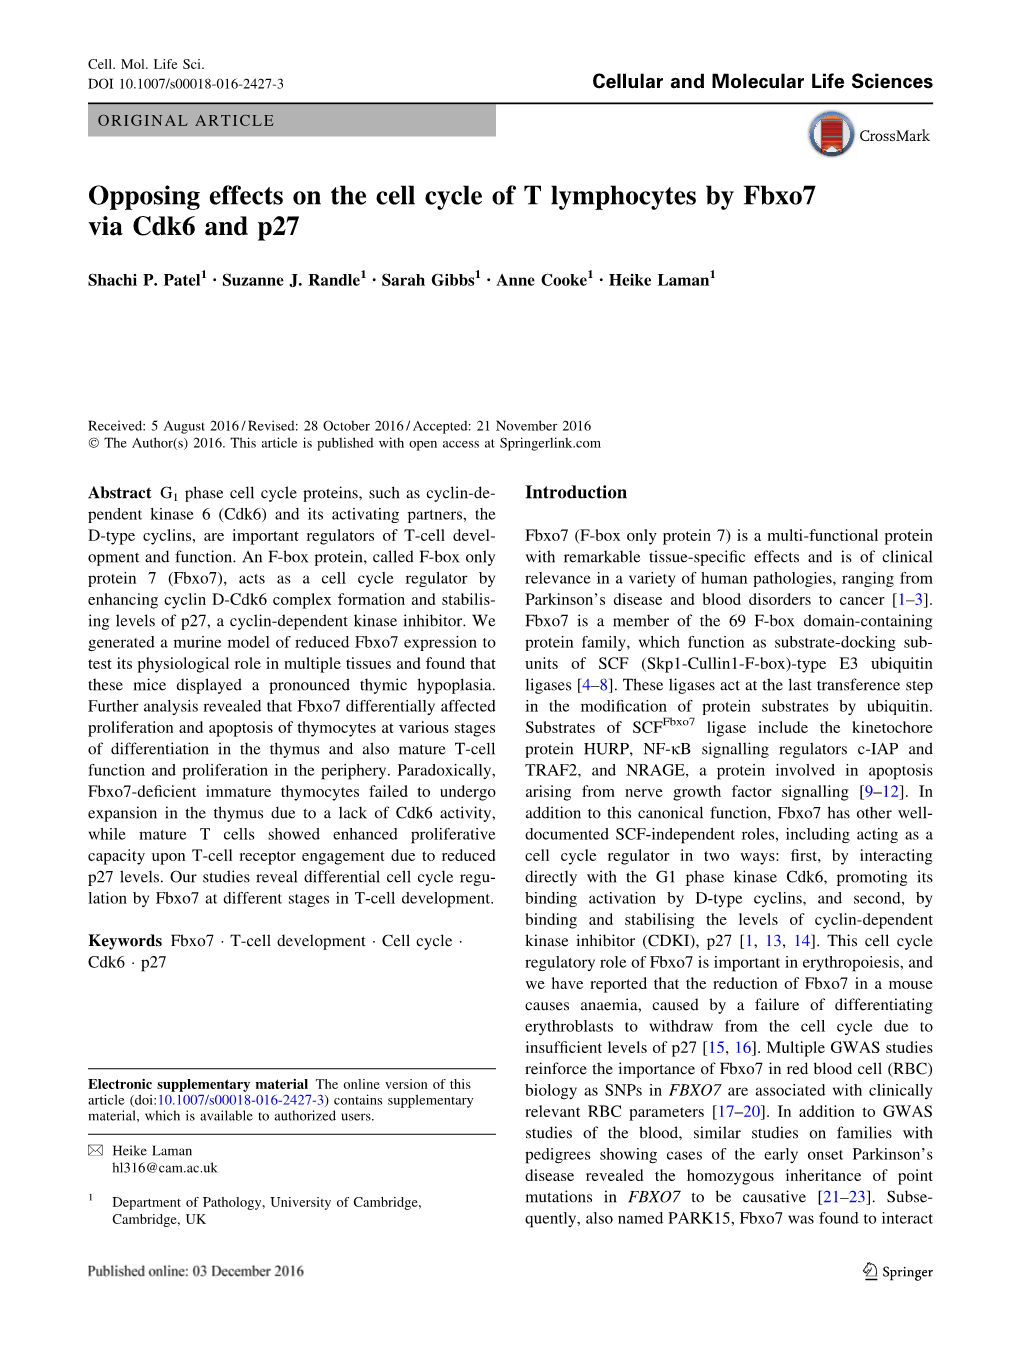 Opposing Effects on the Cell Cycle of T Lymphocytes by Fbxo7 Via Cdk6 and P27